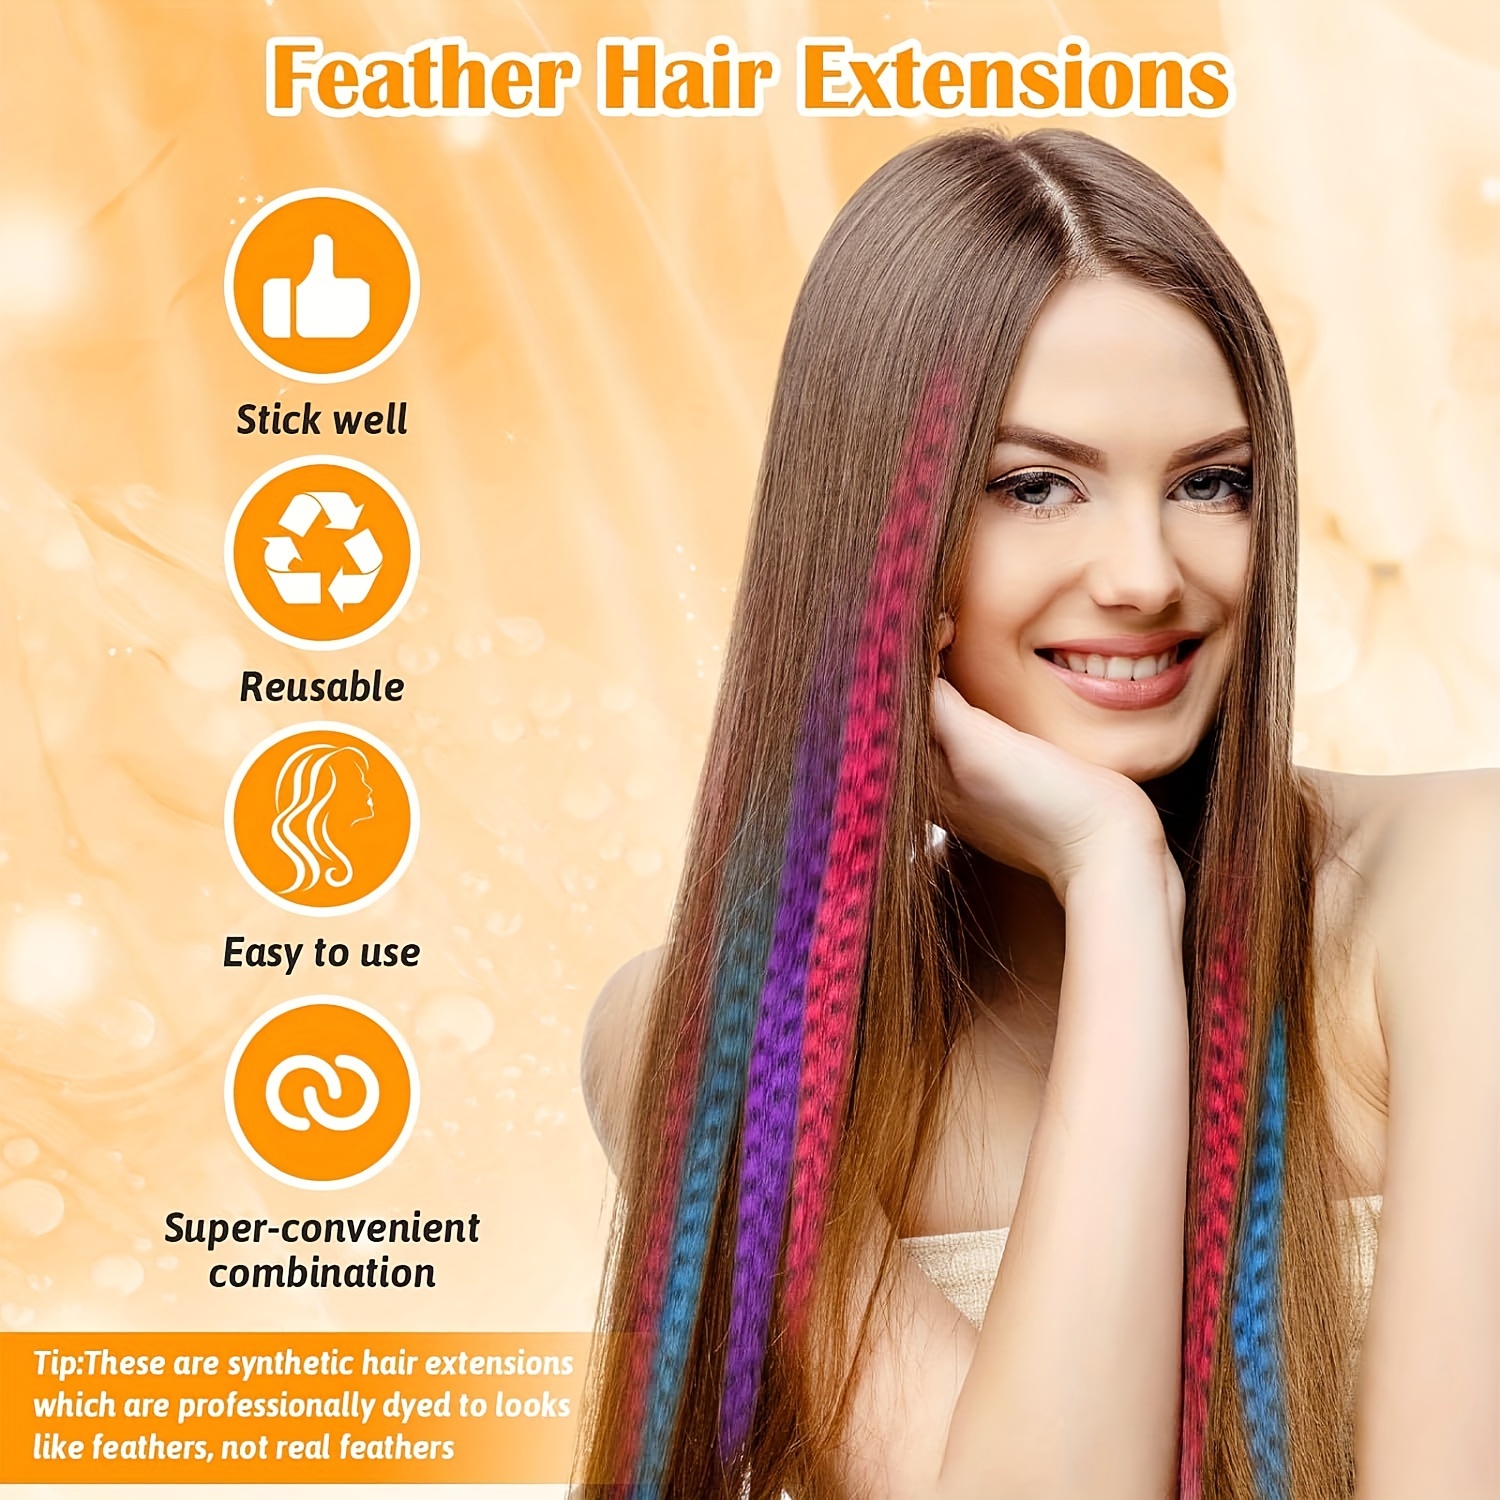 Feather Hair Extensions｜TikTok Search